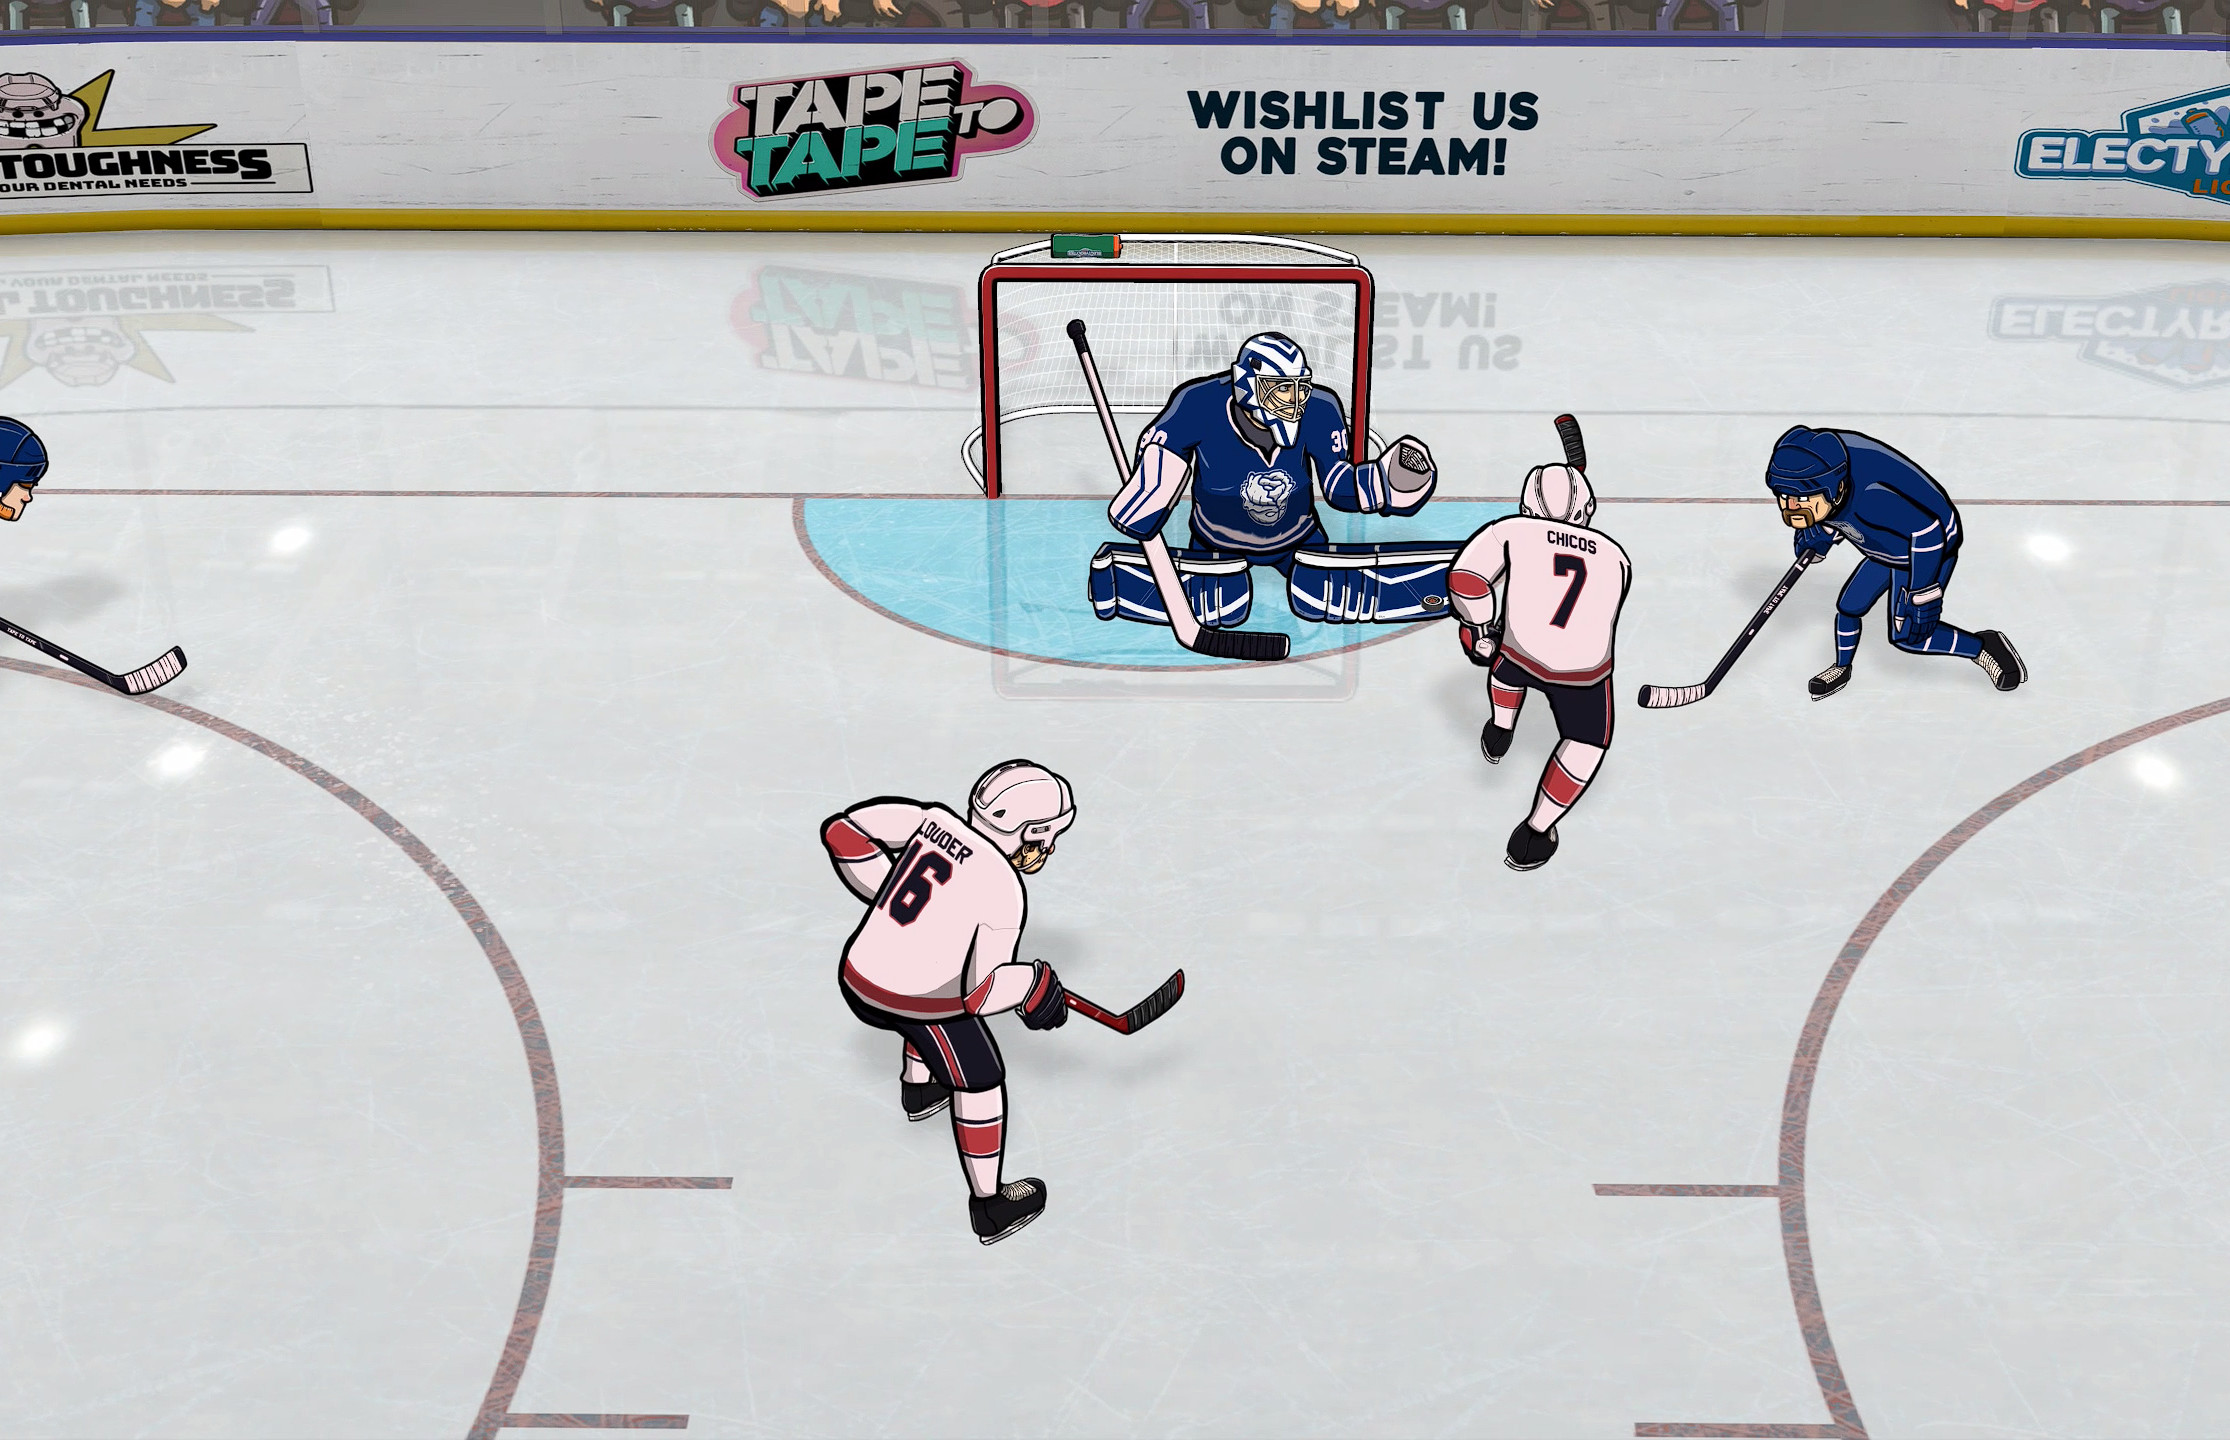 The quest to make a great PC hockey game continues PC Gamer